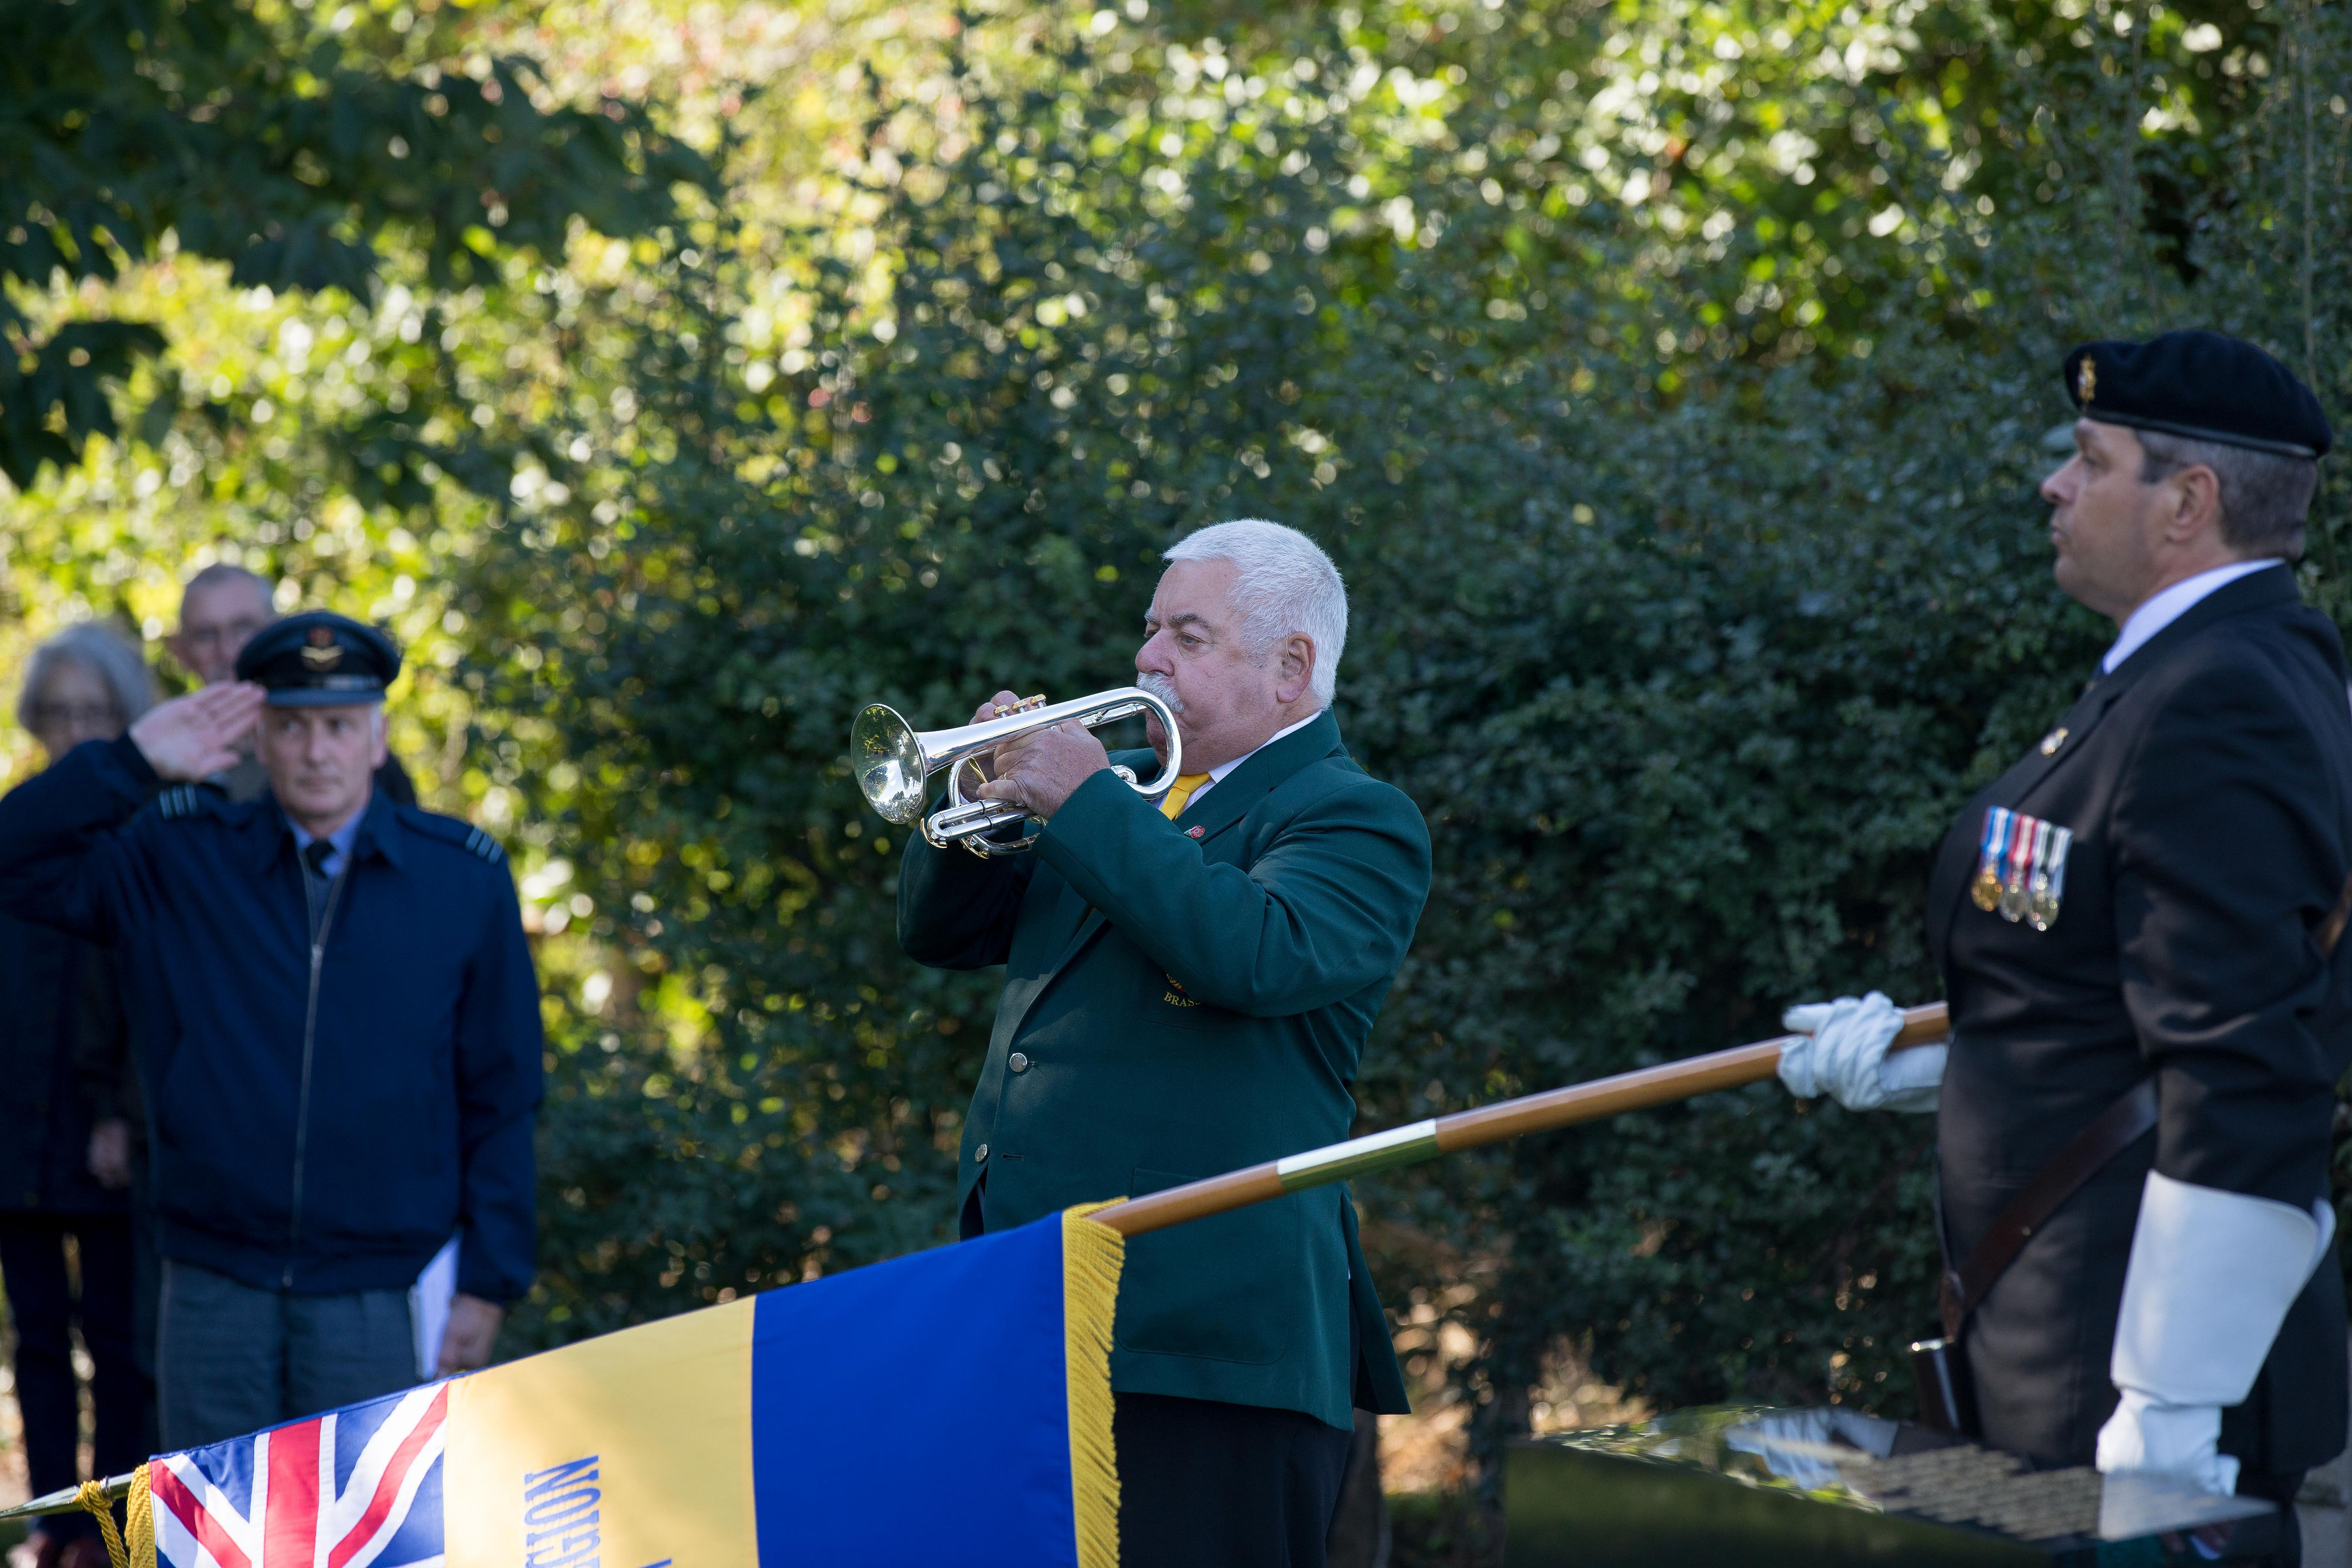 Personnel plays a bugle at service.